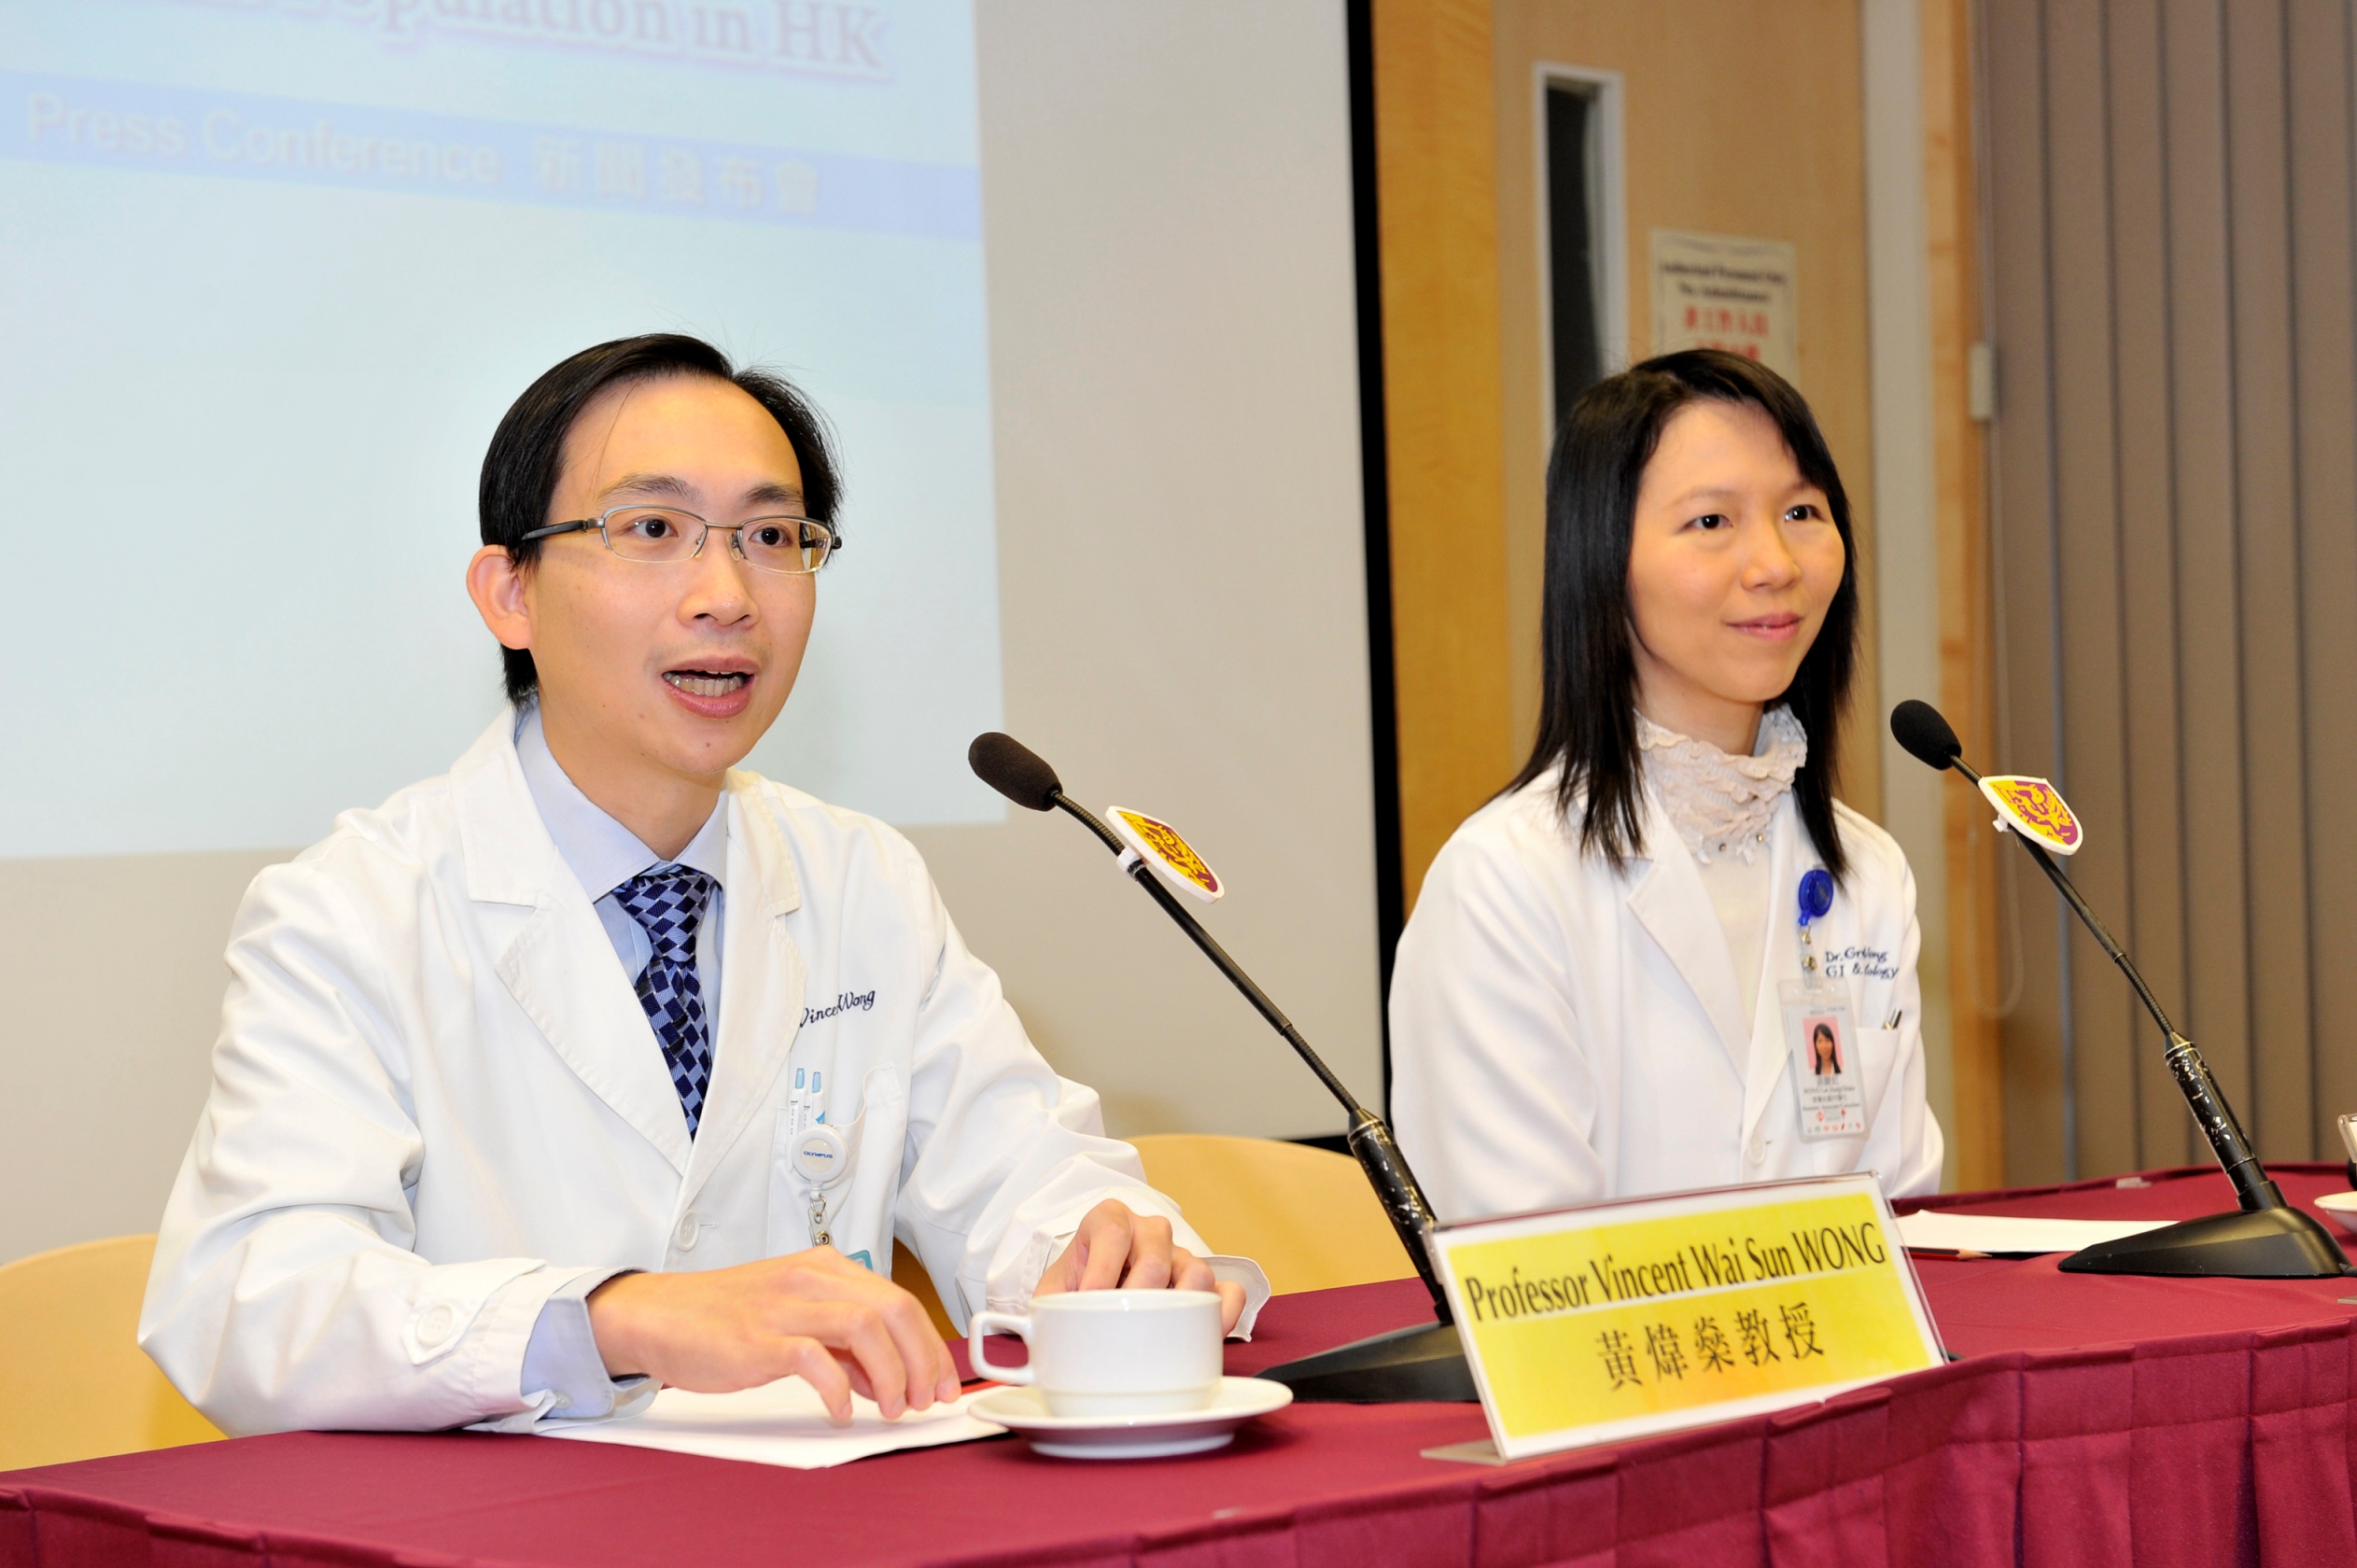 From left: Professor Vincent Wai Sun WONG, Professor, Division of Gastroenterology and Hepatology, Department of Medicine and Therapeutics and Deputy Director, Center for Liver Health at CUHK and Professor Grace Lai Hung WONG, Associate Professor, Department of Medicine and Therapeutics at CUHK present their recent research on the use of a new non-invasive imaging technology to identify mild fatty liver cases which may be missed by ultrasound scan